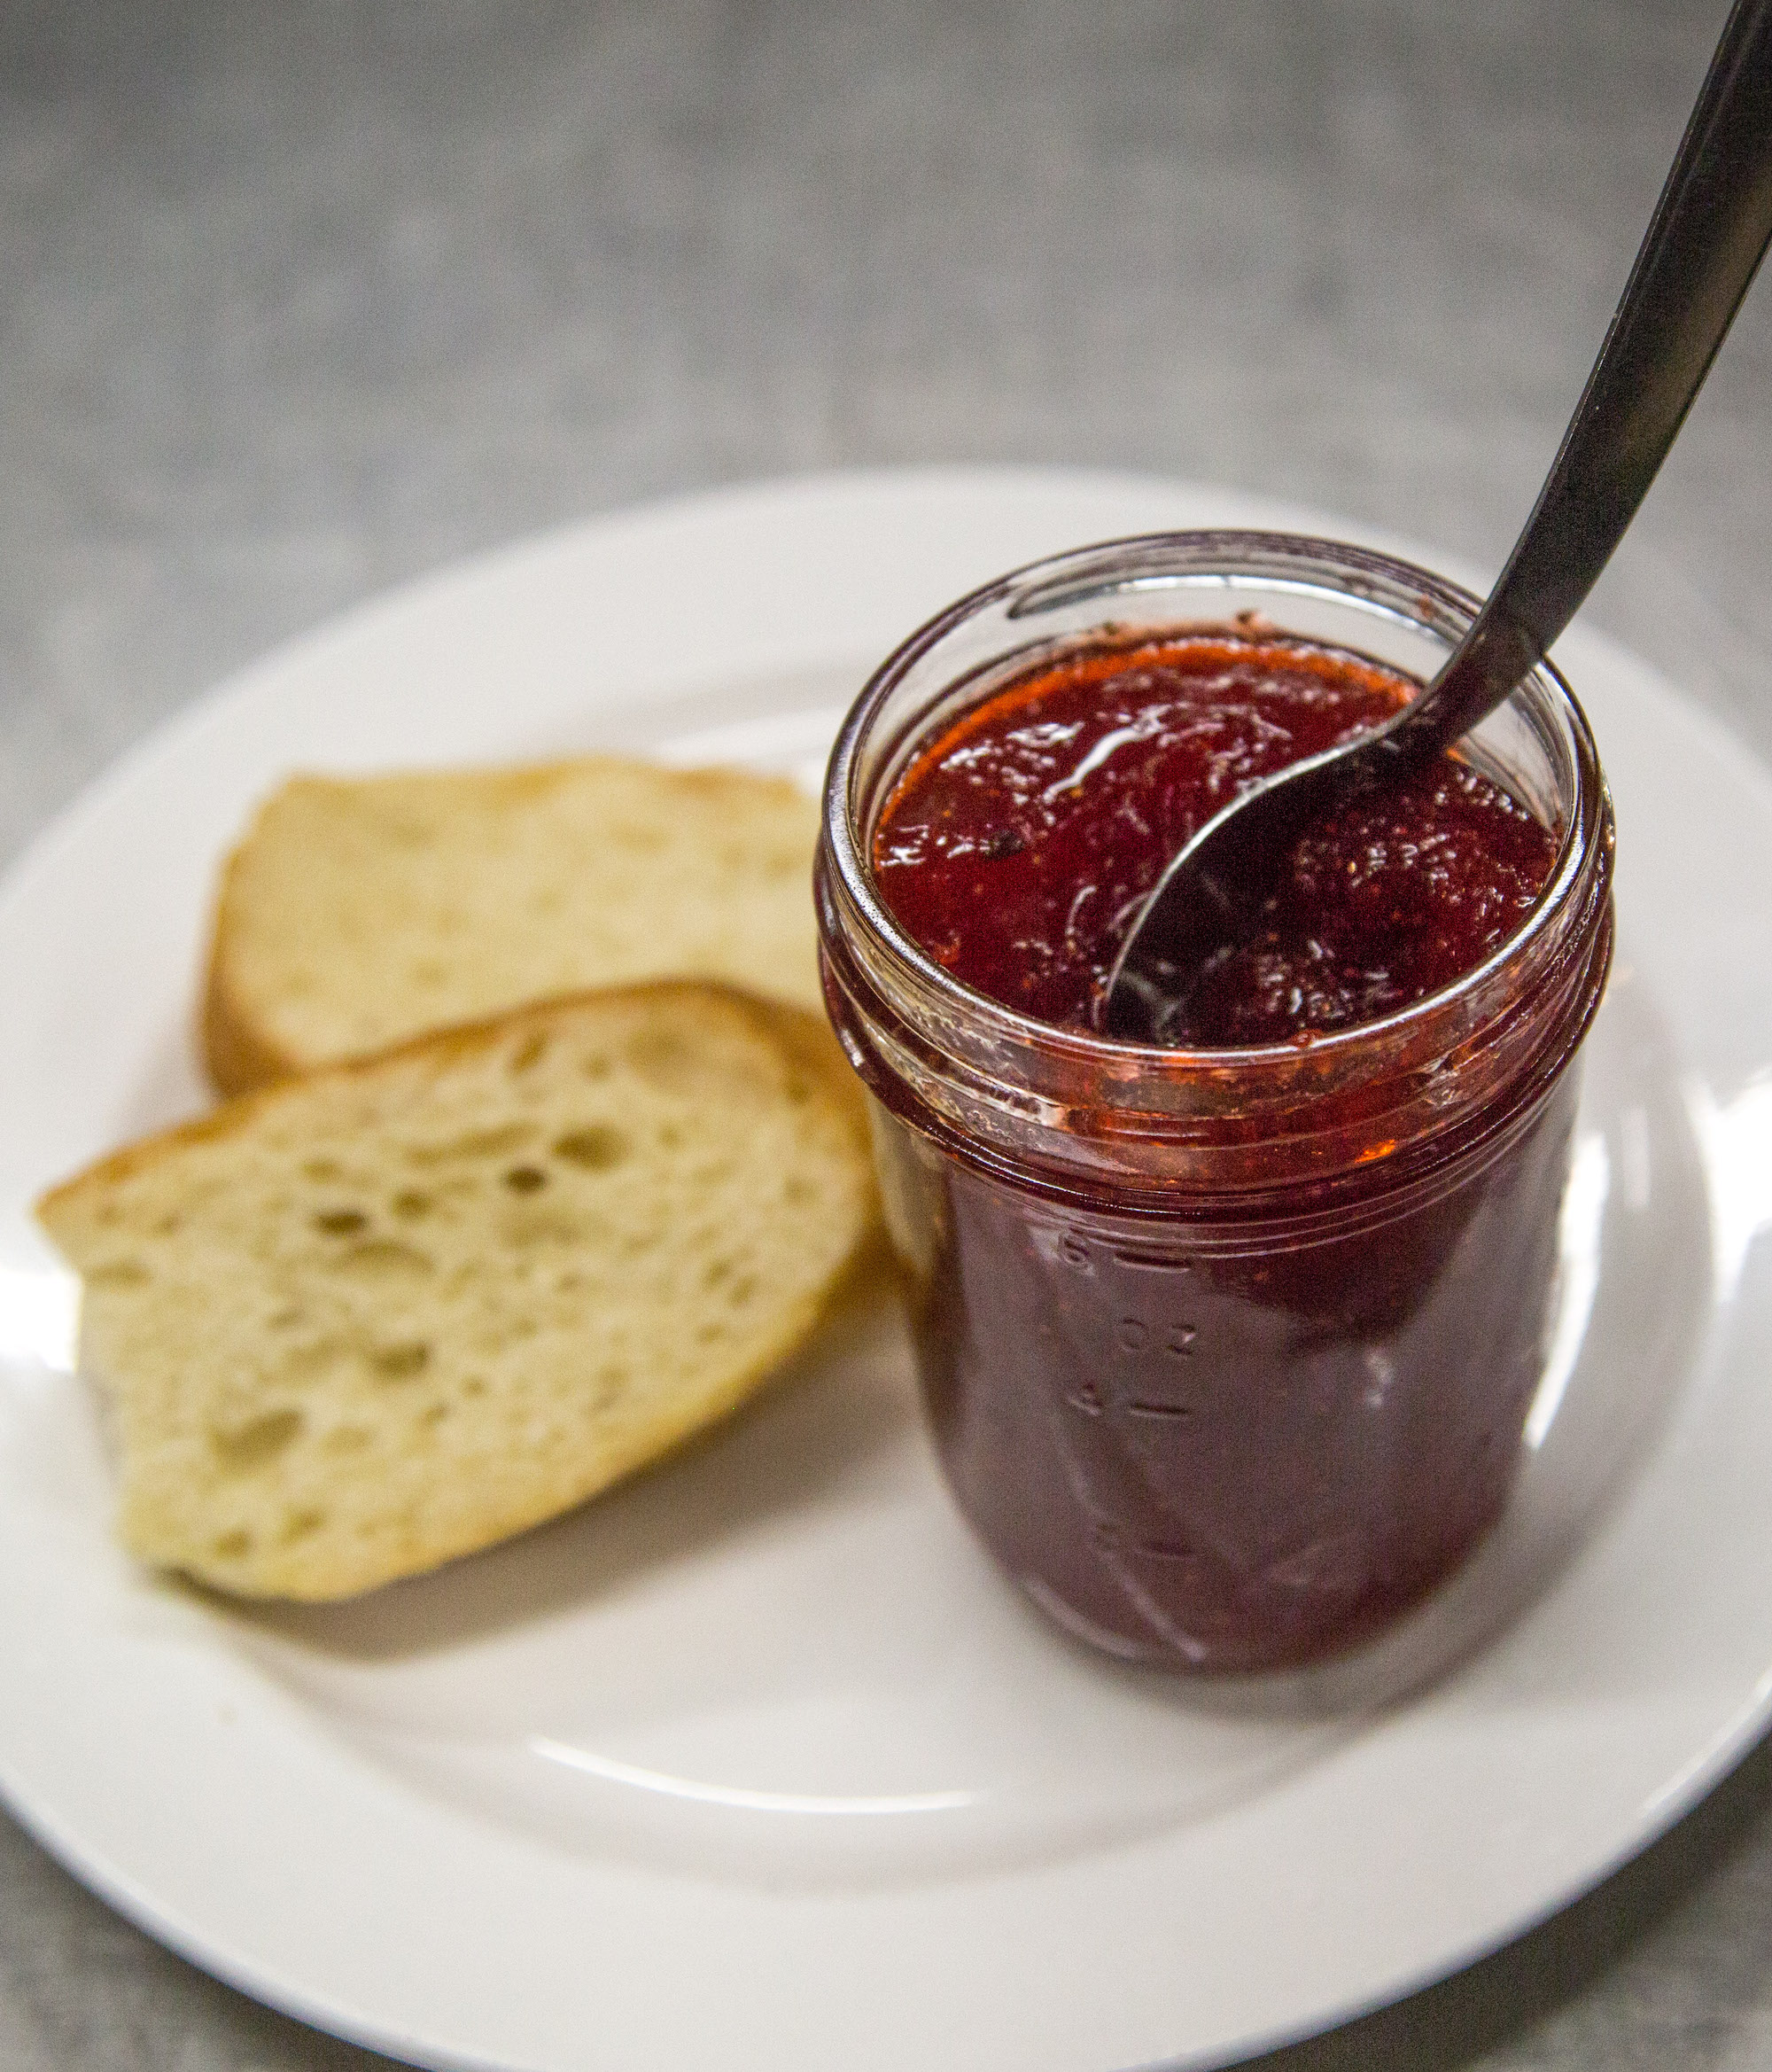 An open jar of strawberry jam on a plate with white bread.